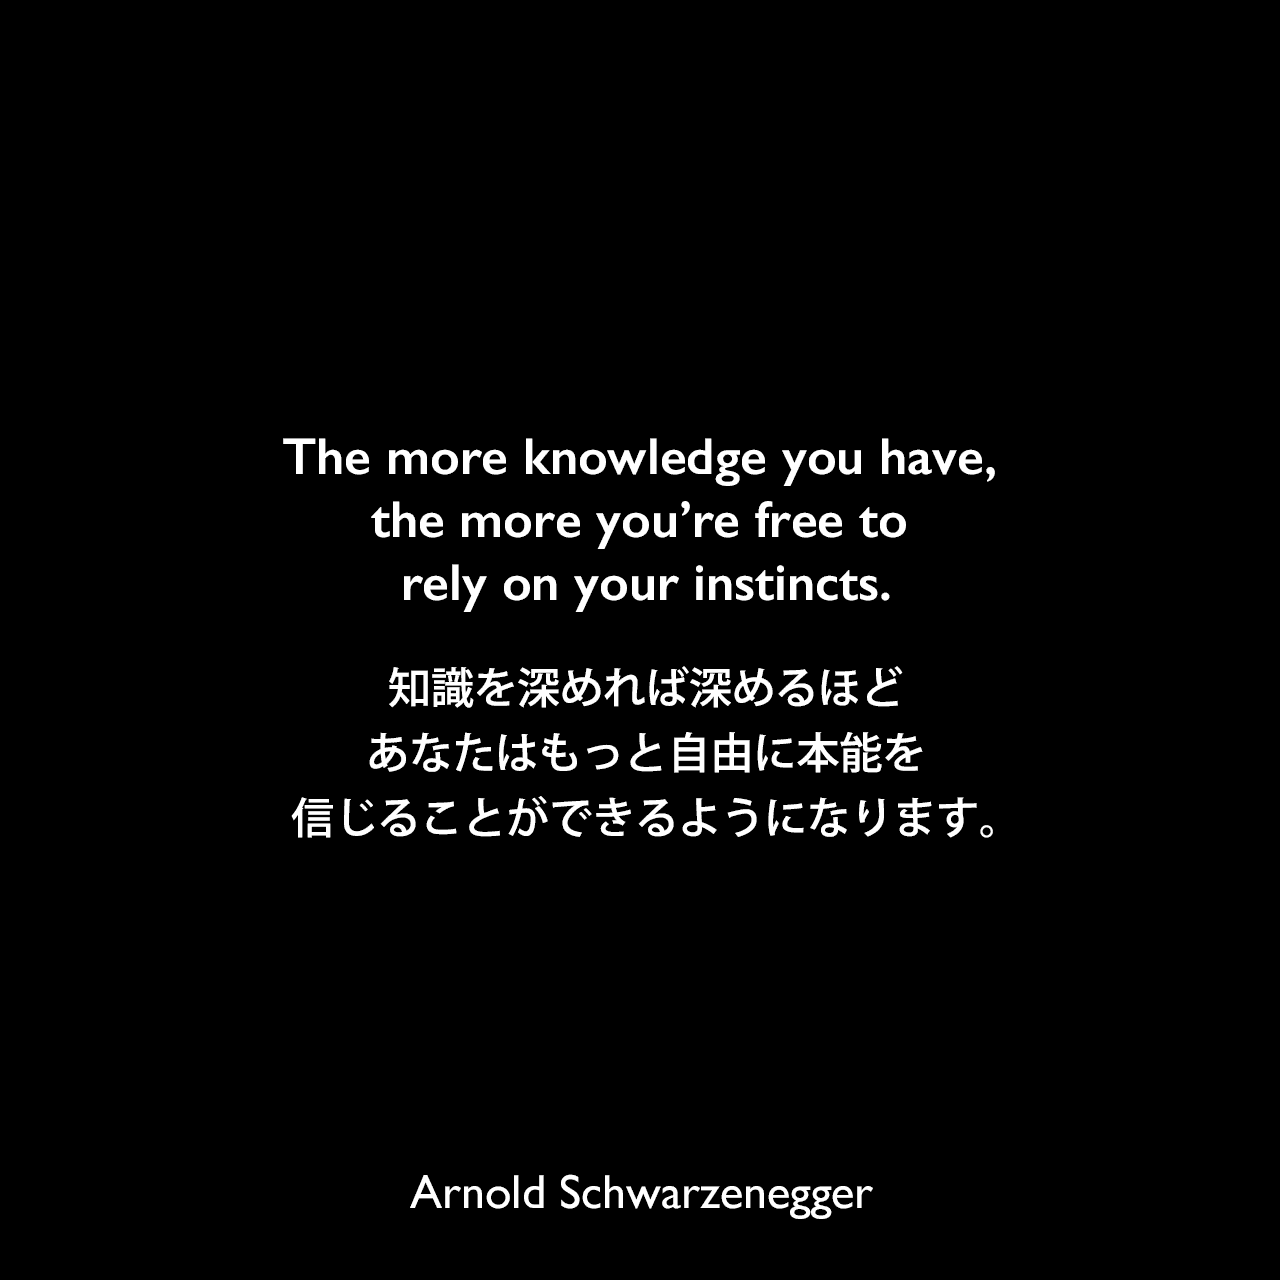 The more knowledge you have, the more you’re free to rely on your instincts.知識を深めれば深めるほど、あなたはもっと自由に本能を信じることができるようになります。Arnold Schwarzenegger